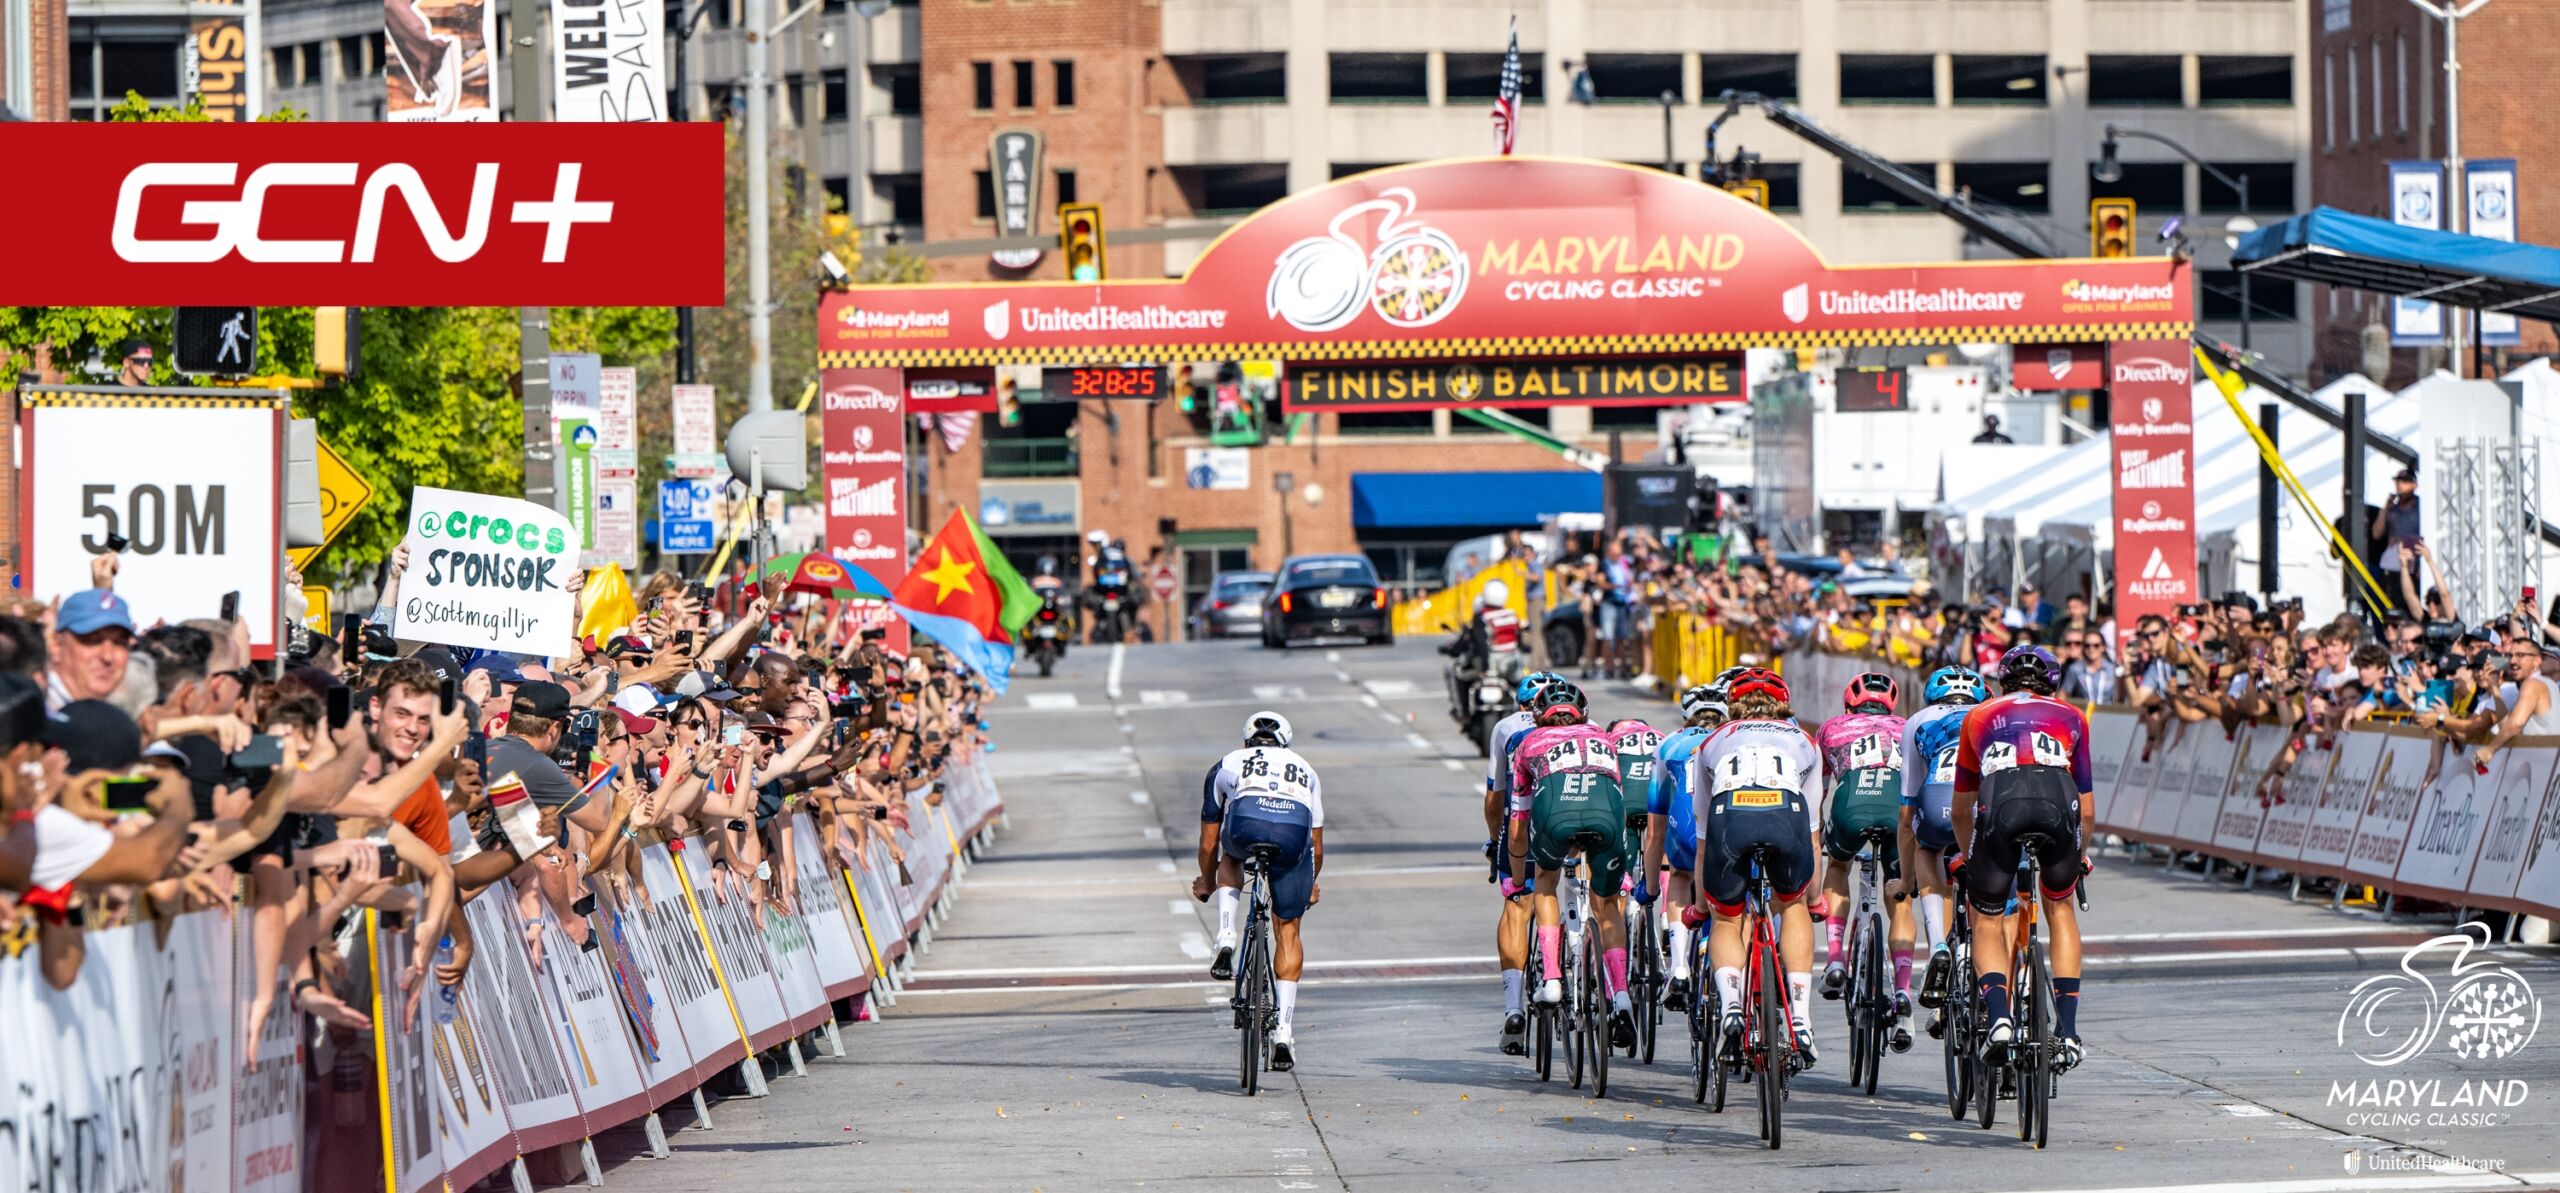 Maryland Cycling Classic Extends Broadcast Partnership with GCN+